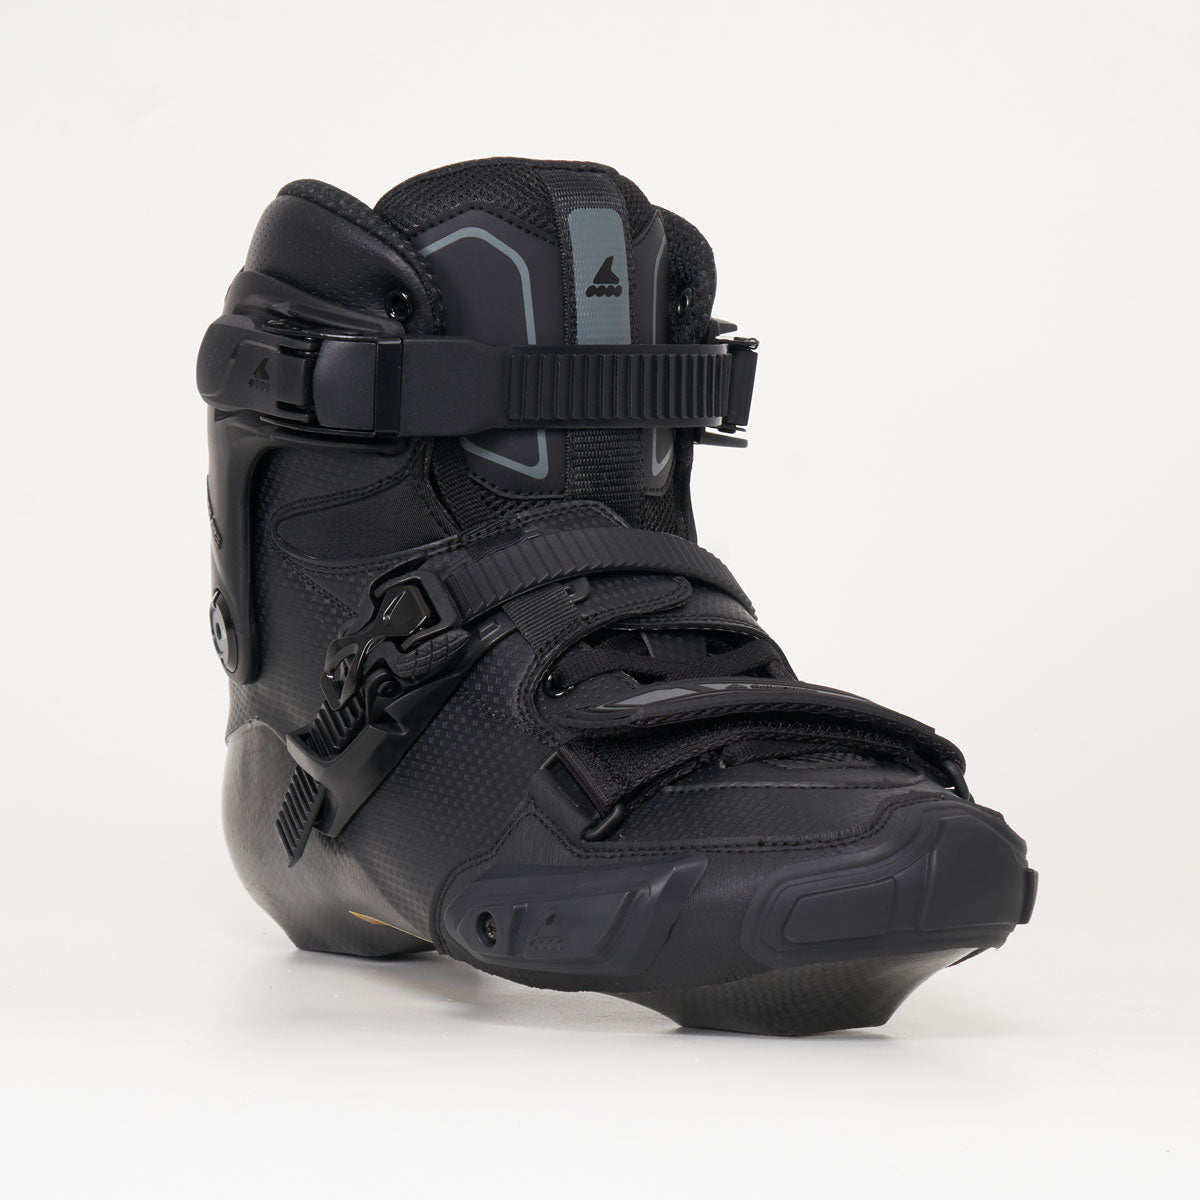 Rollerblade Crossfire Skates [Boot Only]